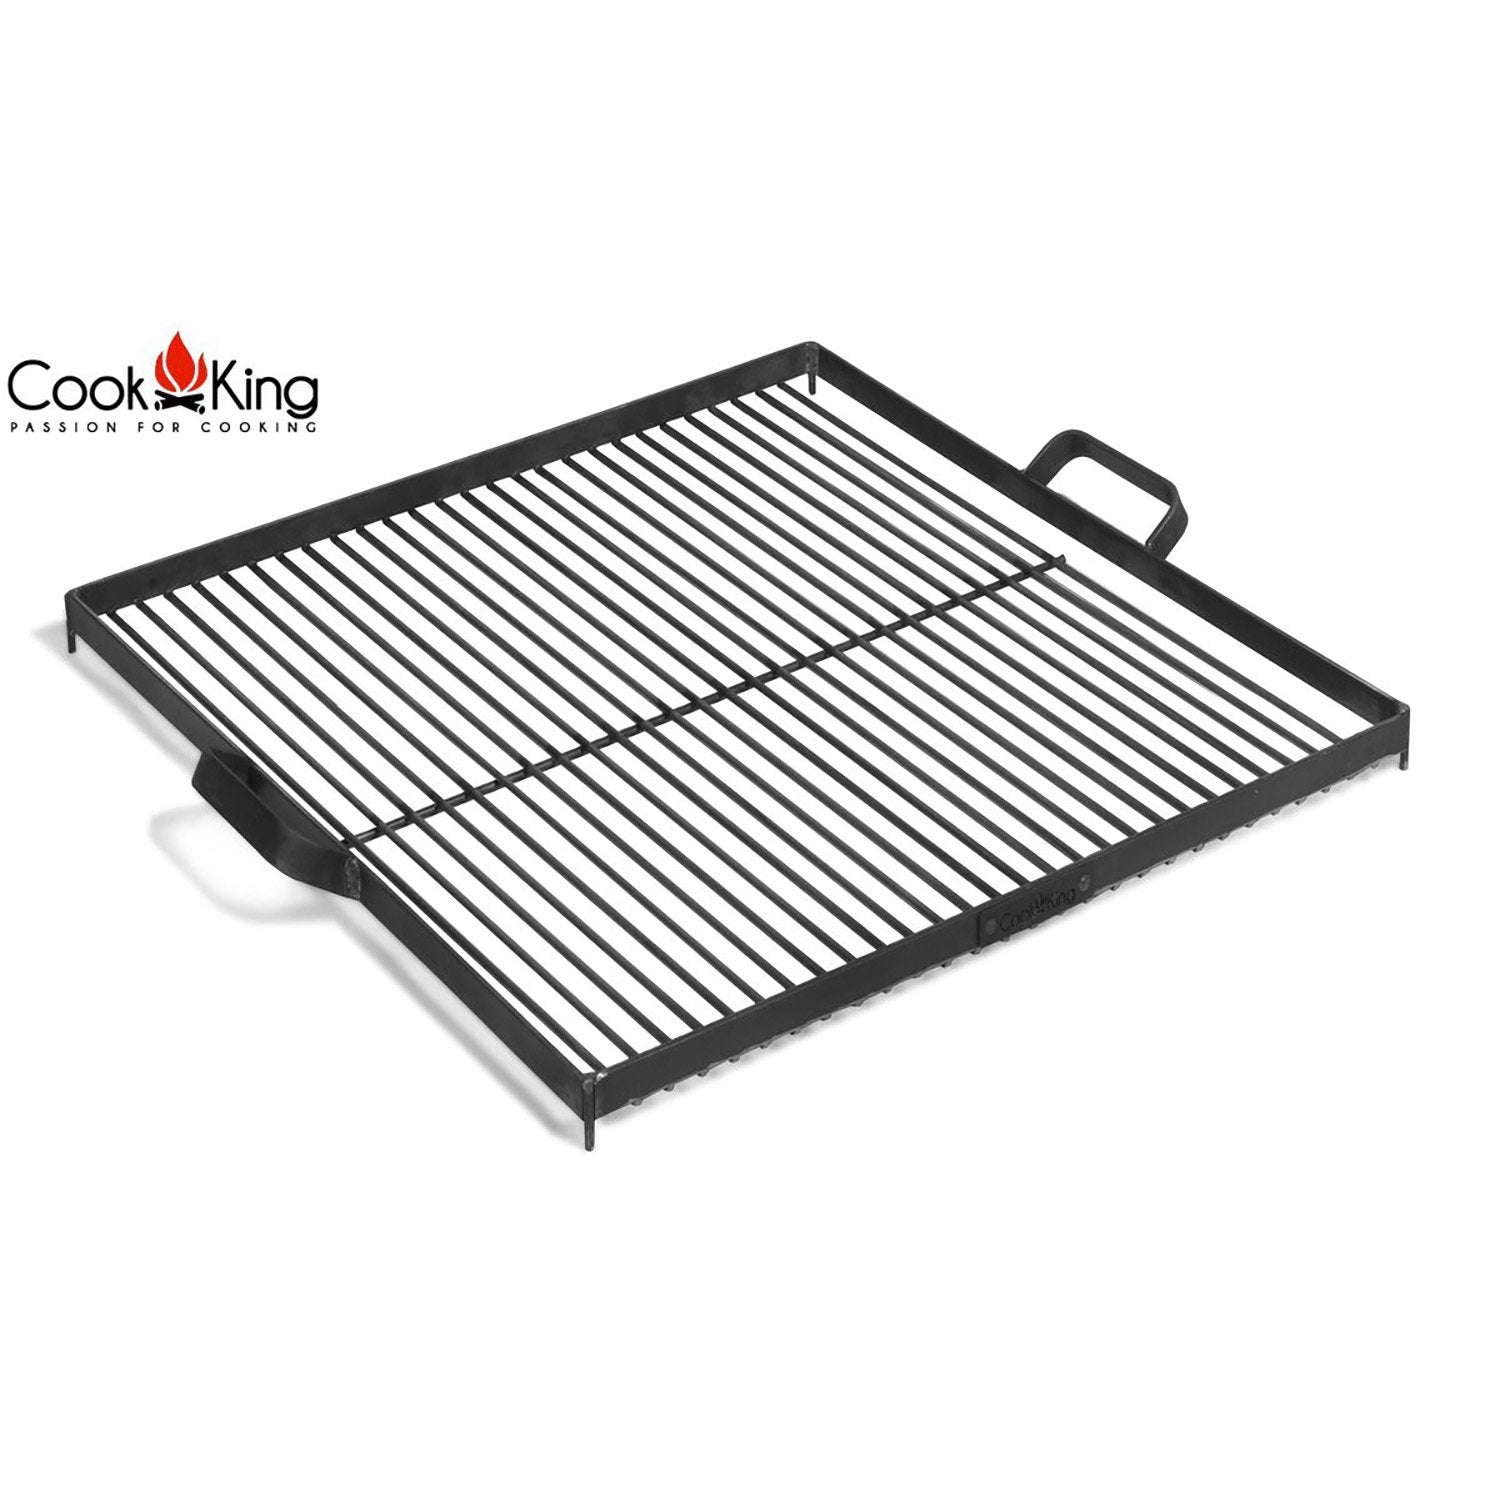 Grill Grate for Firebowls